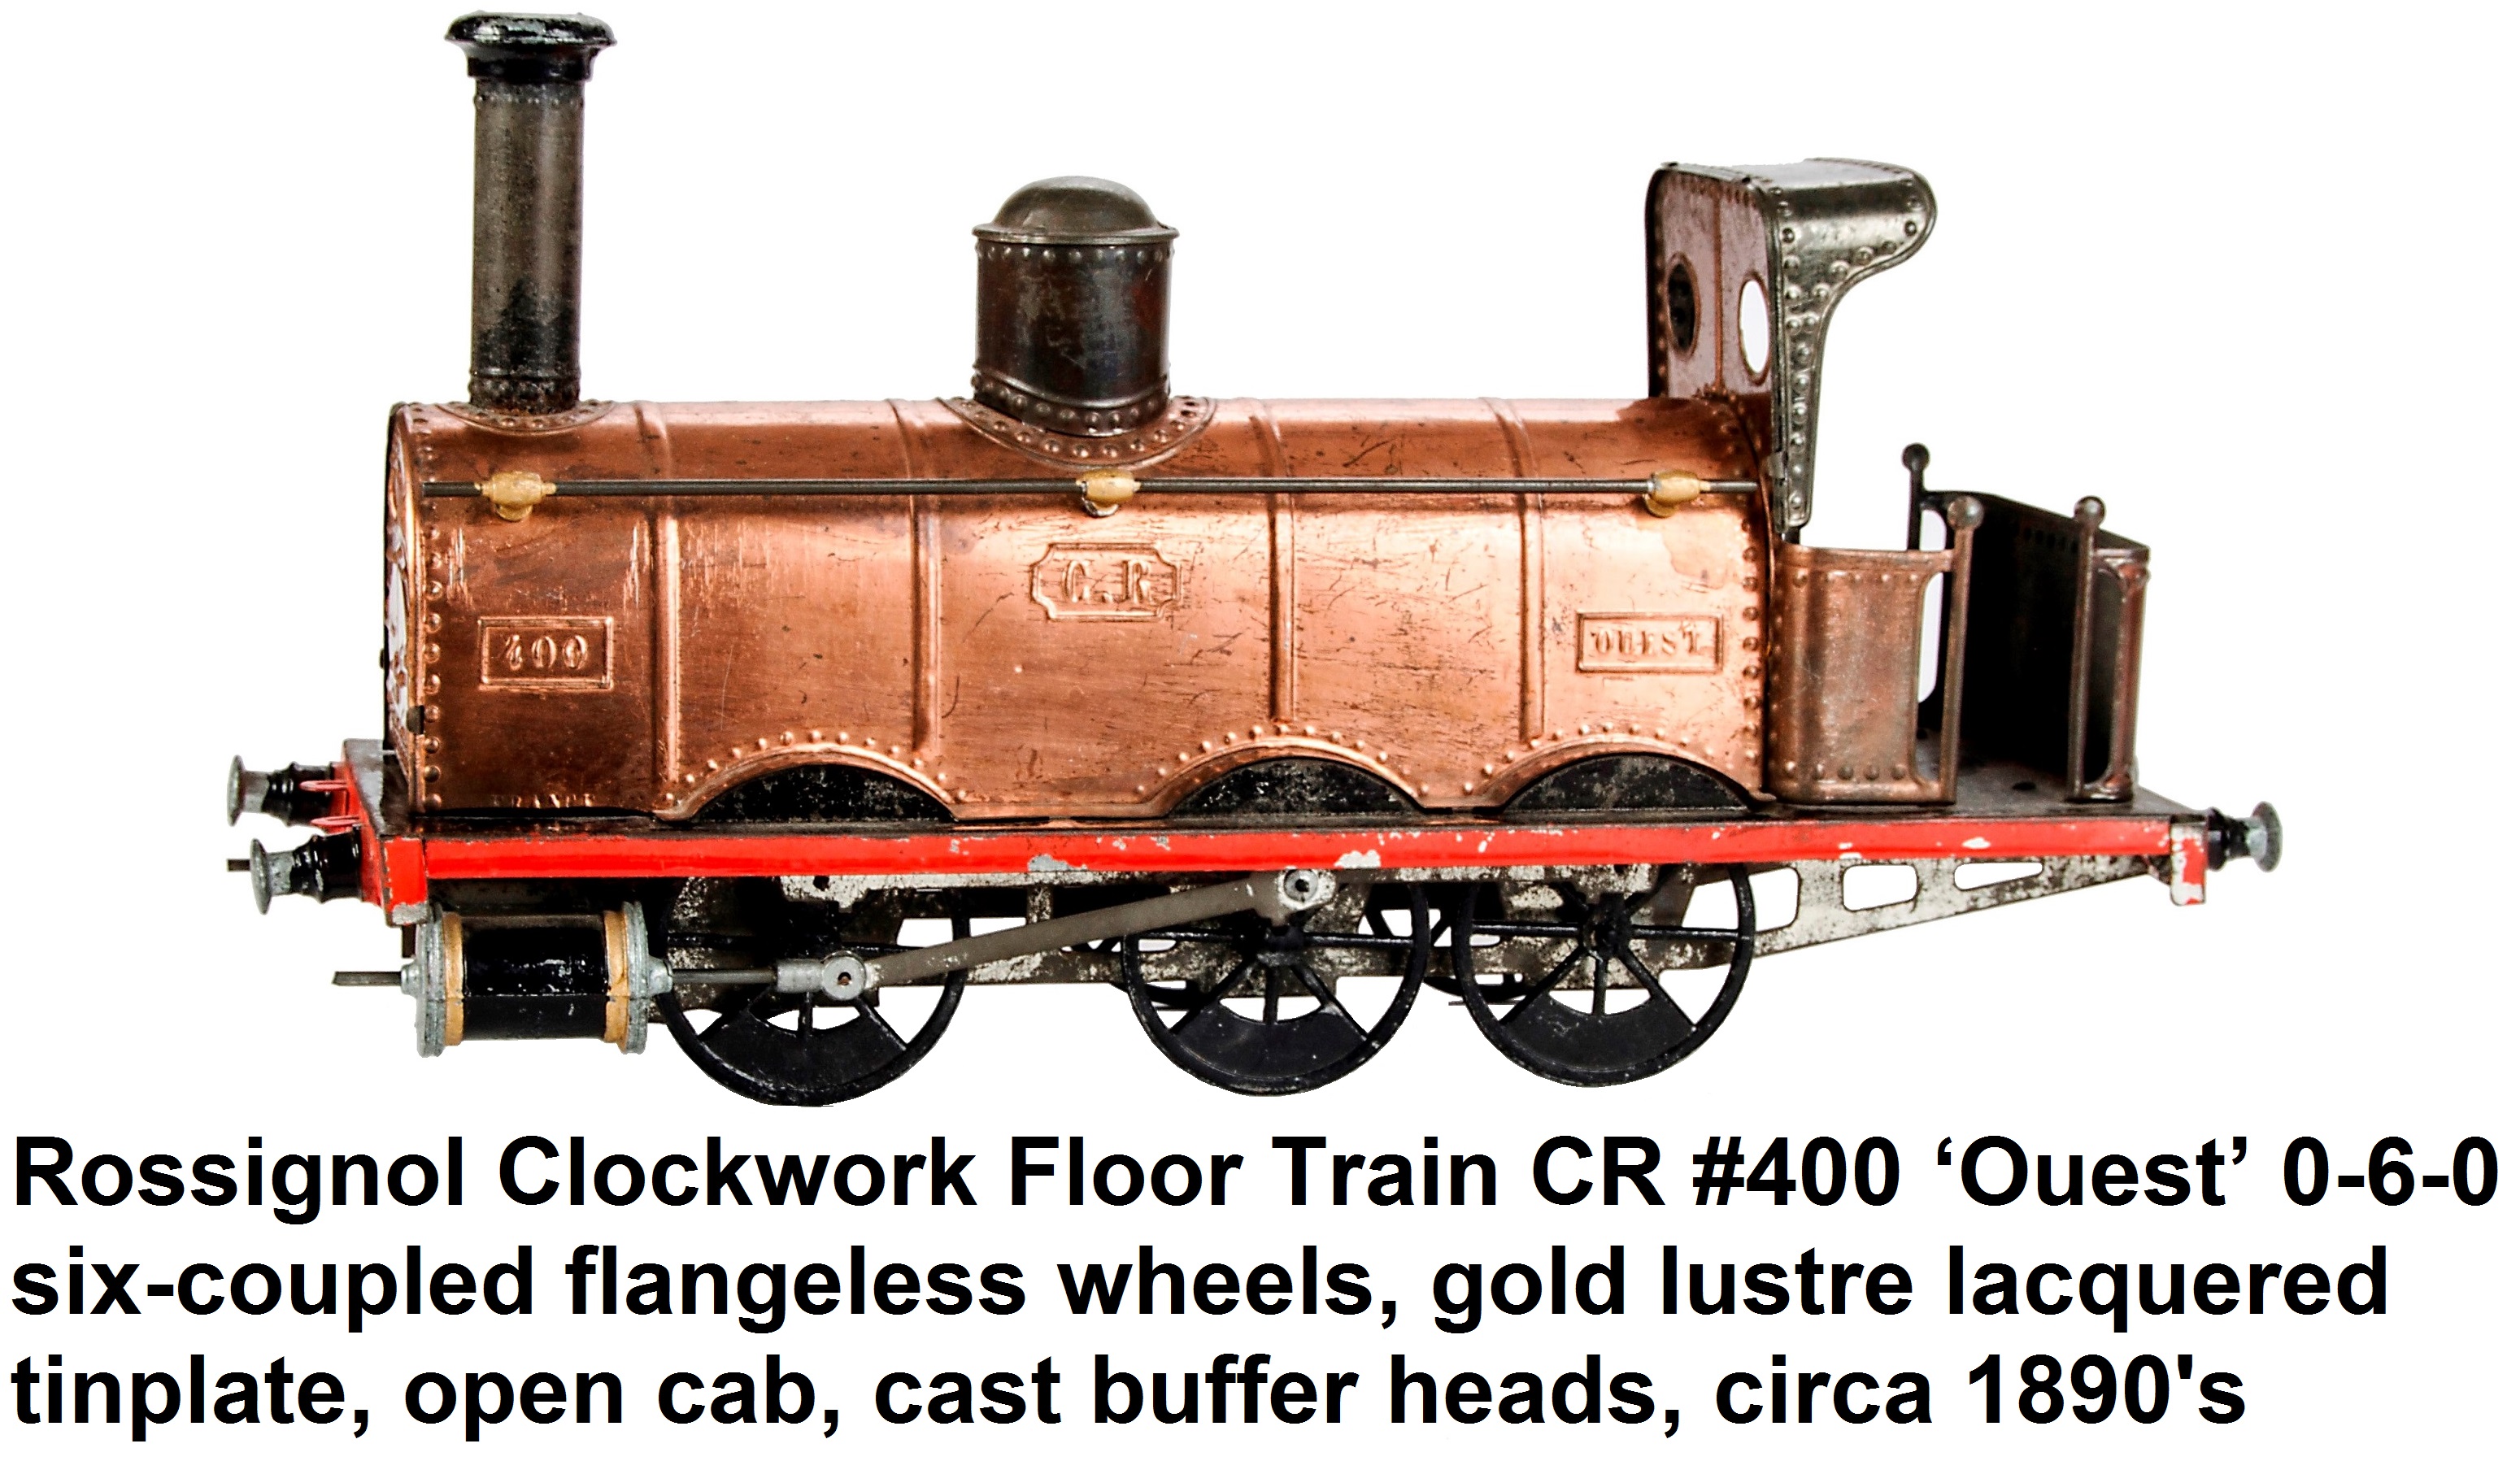 Rossignol Clockwork Floor Train CR #400 ‘Ouest’, 0-6-0 six-coupled flangeless wheels gold lustre lacquered tinplate 
	and open cab, cast buffer heads, circa 1890's